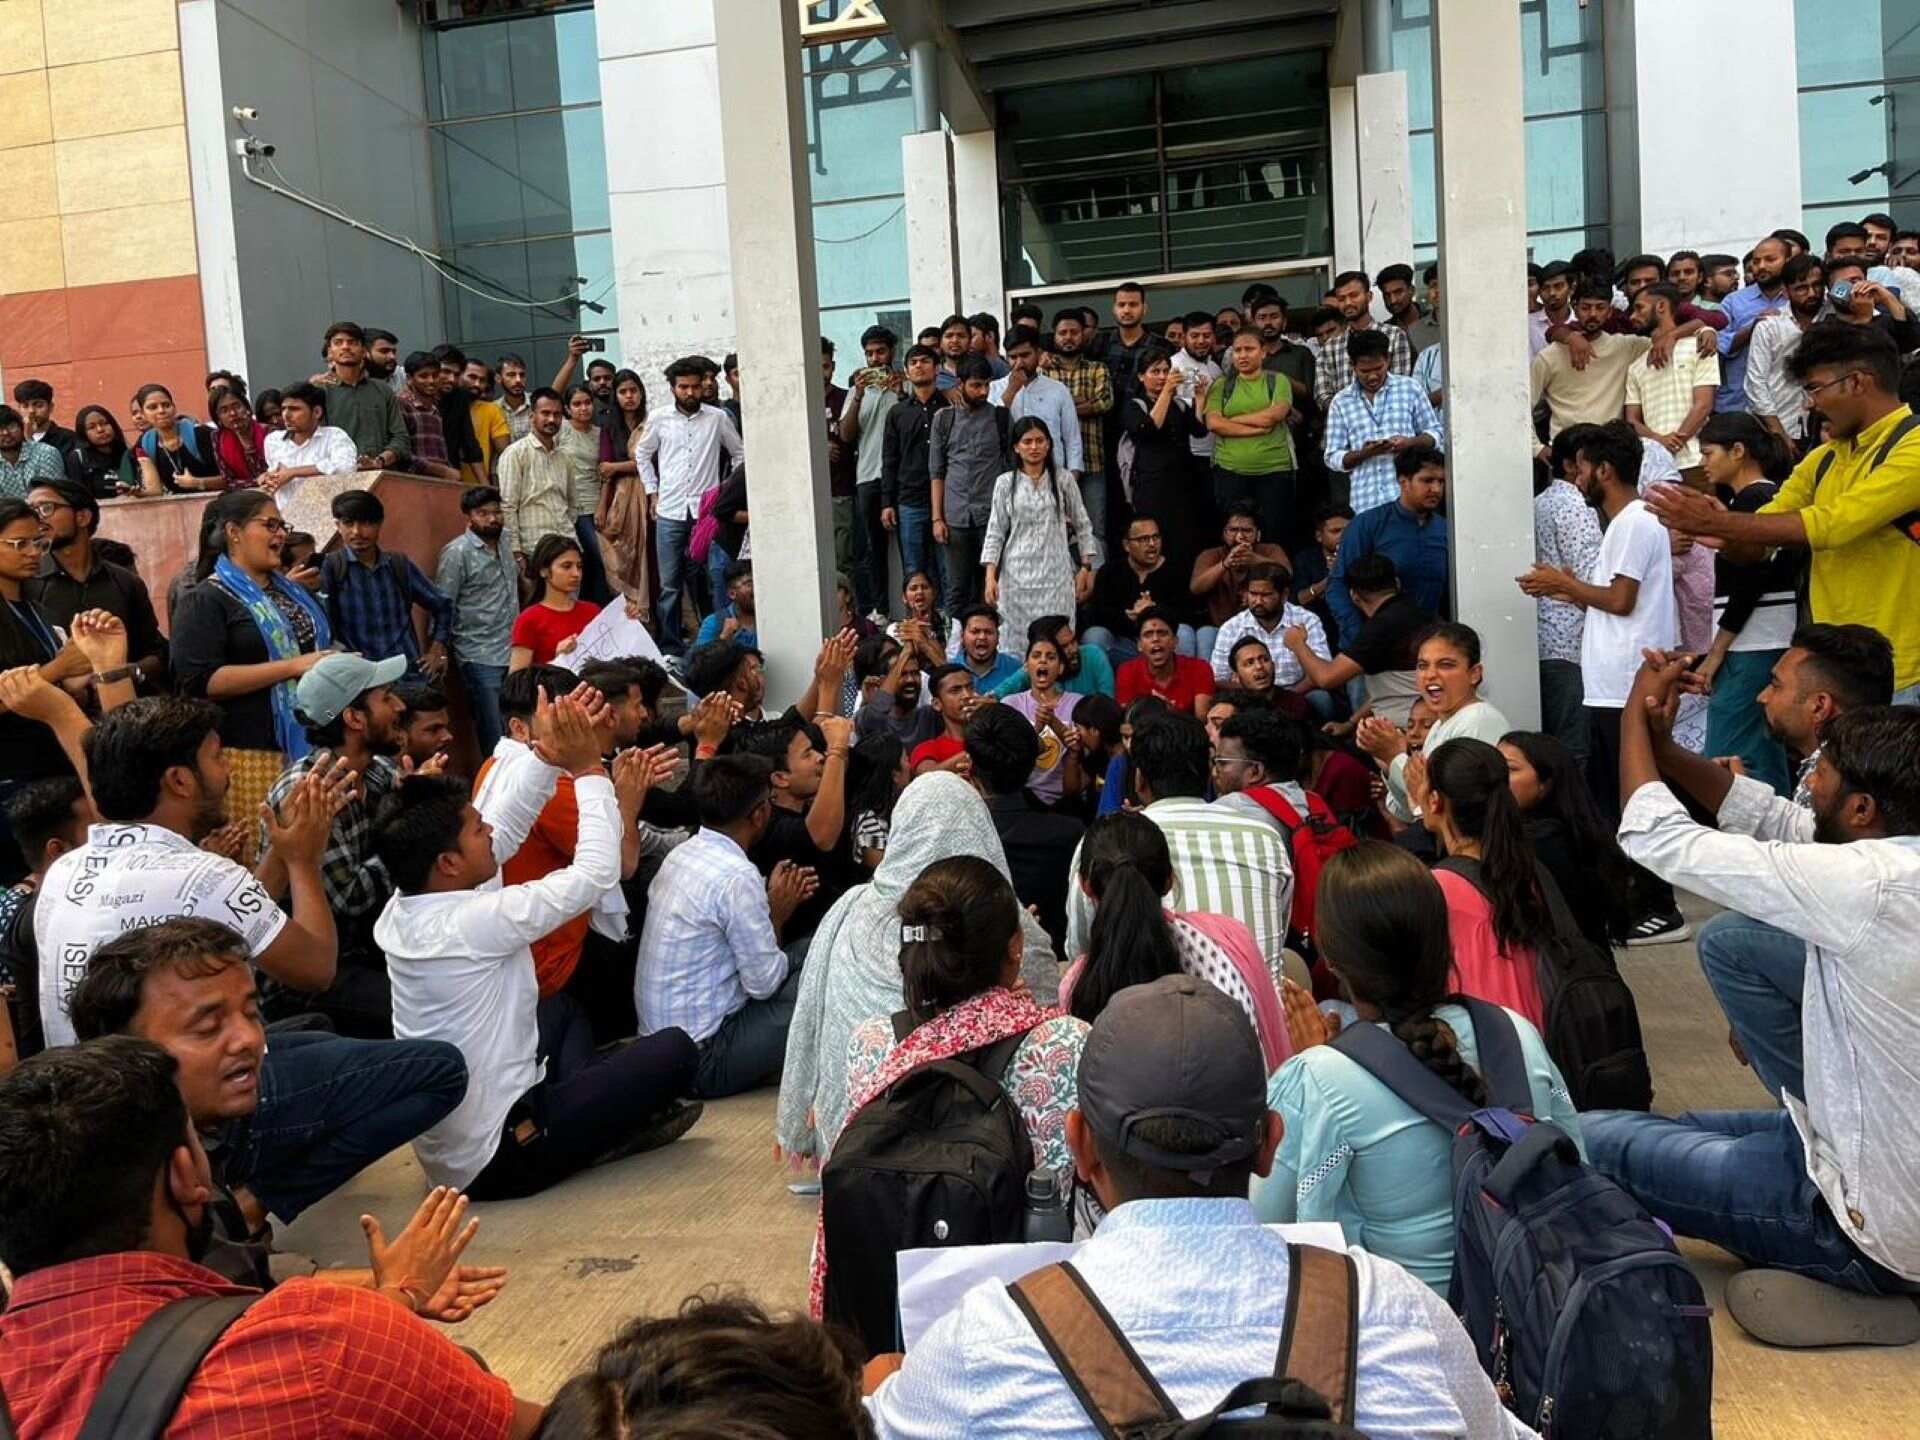 Alarming Incident at Central University Of Haryana: Outsiders Attack Students, ABVP Demands Action